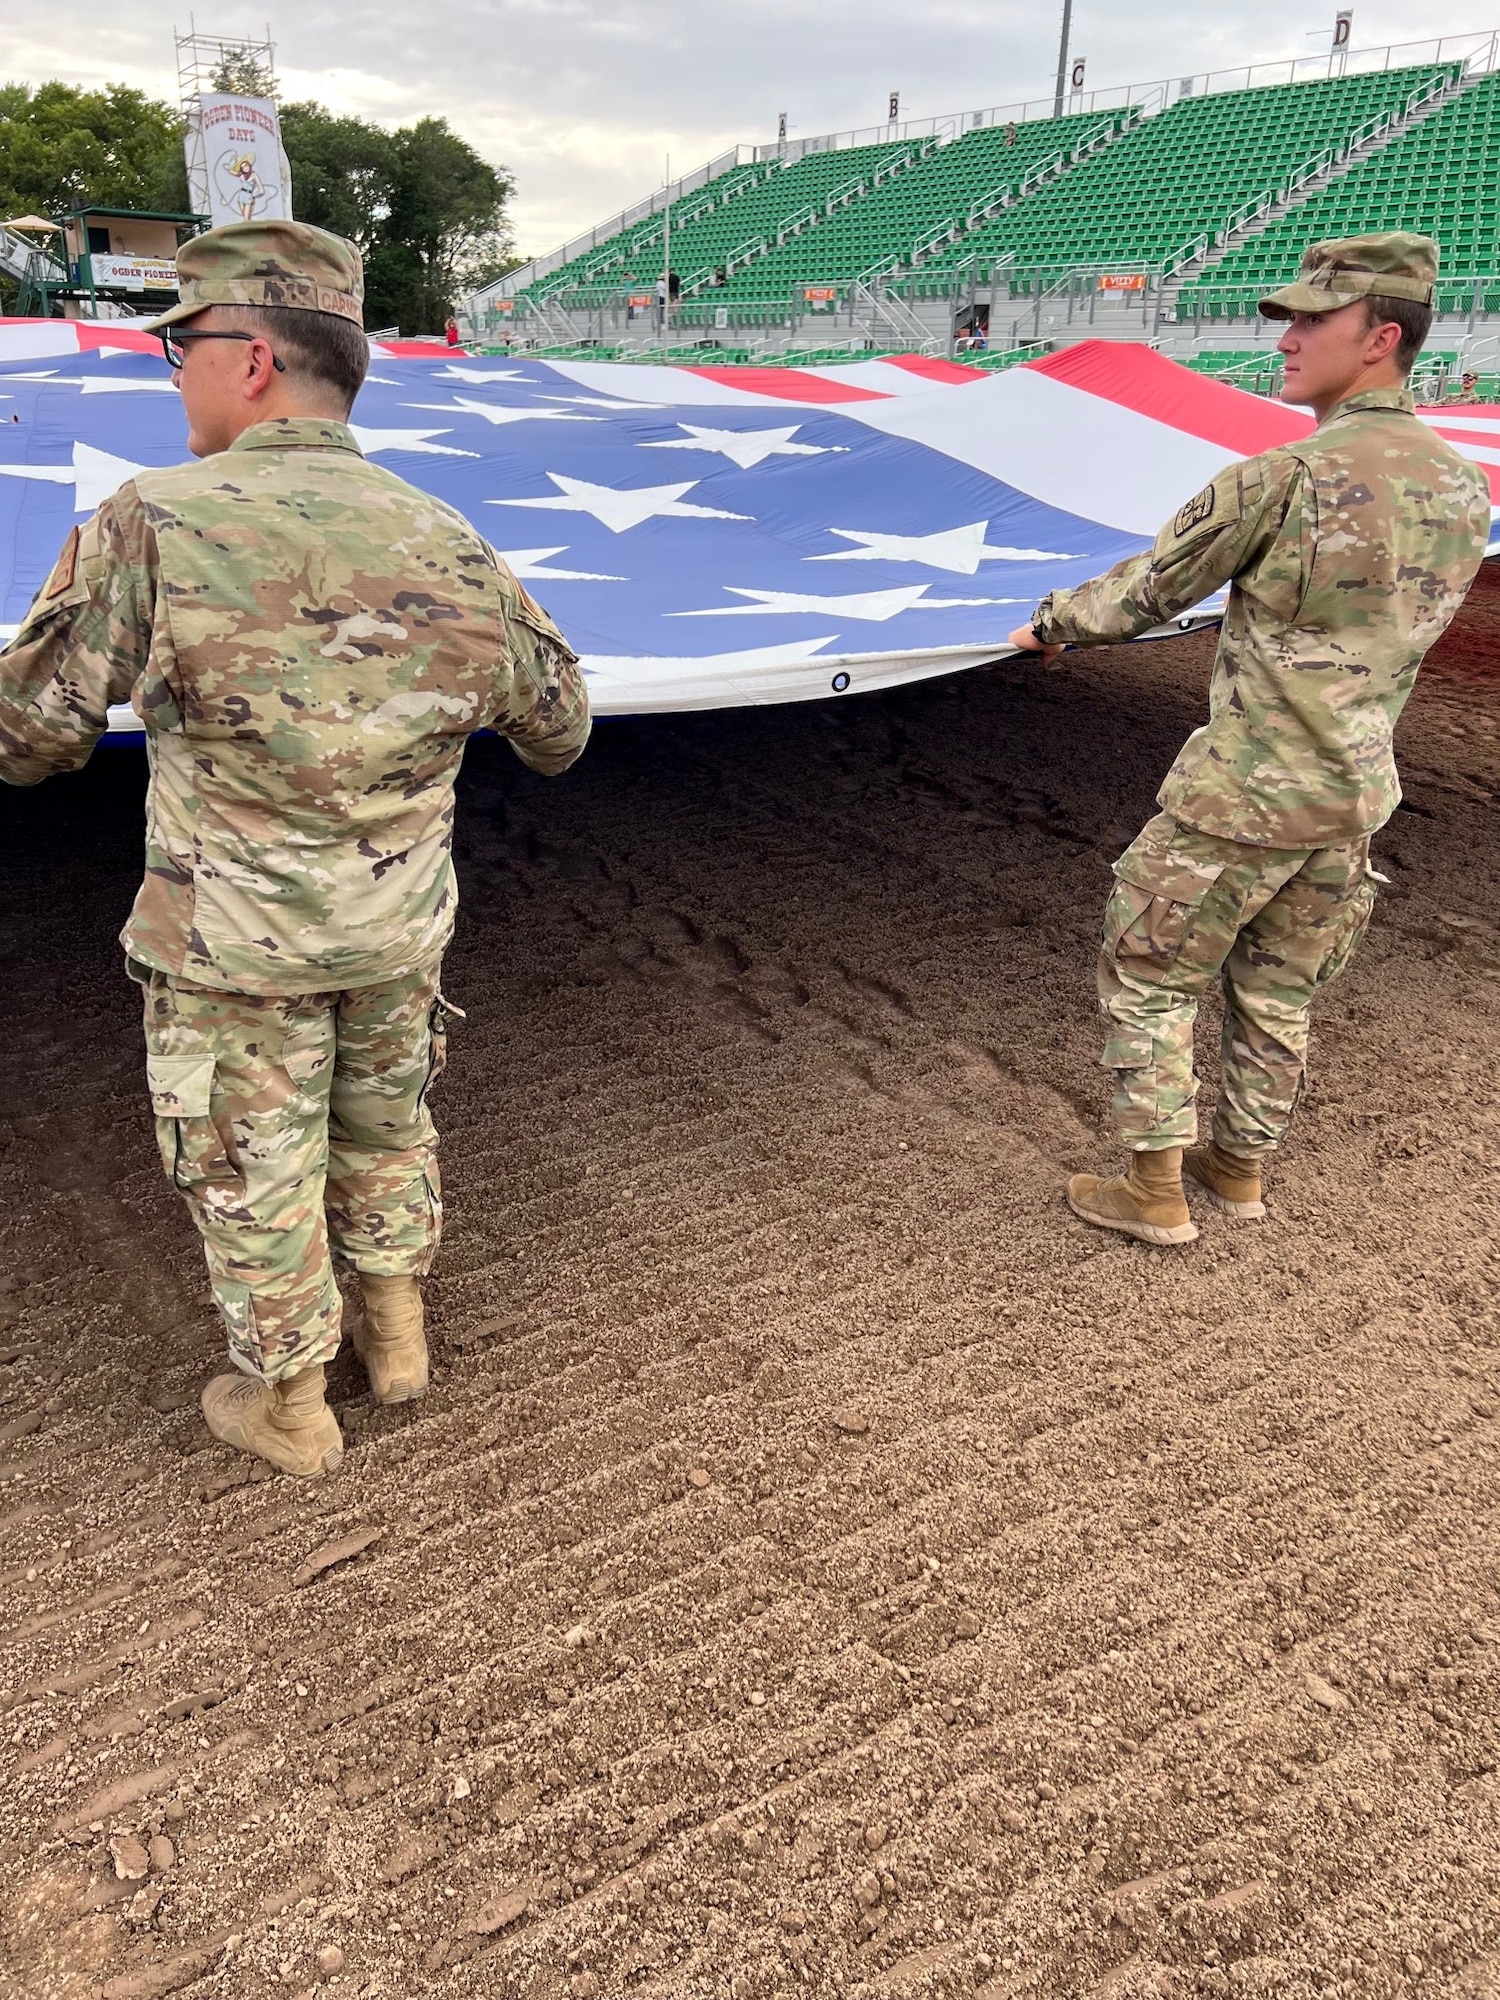 Left, Col. Christopher Carmichael, 748th Supple Chain Management Group commander, and his son, Air Force Cadet Skip Carmichael unfurl The Major, a giant American flag, in a practice run before Patriot Night at the Ogden Pioneer Days Rodeo opening ceremony July 22, 2022, in Ogden,